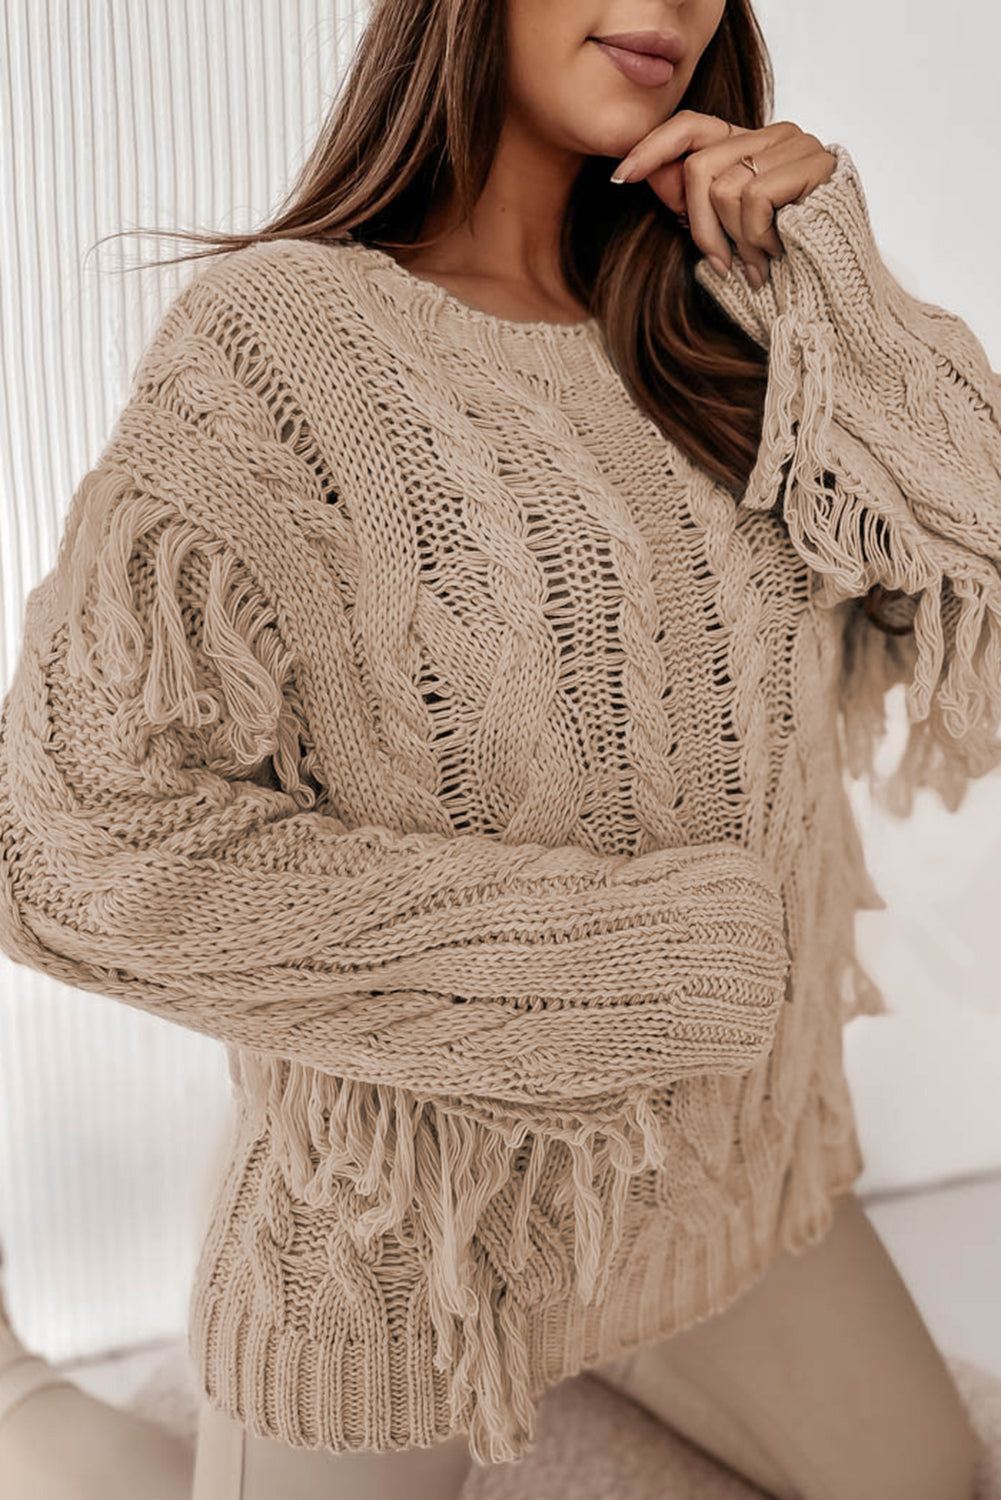 Parchment Tasseled Braided Knit Sweater